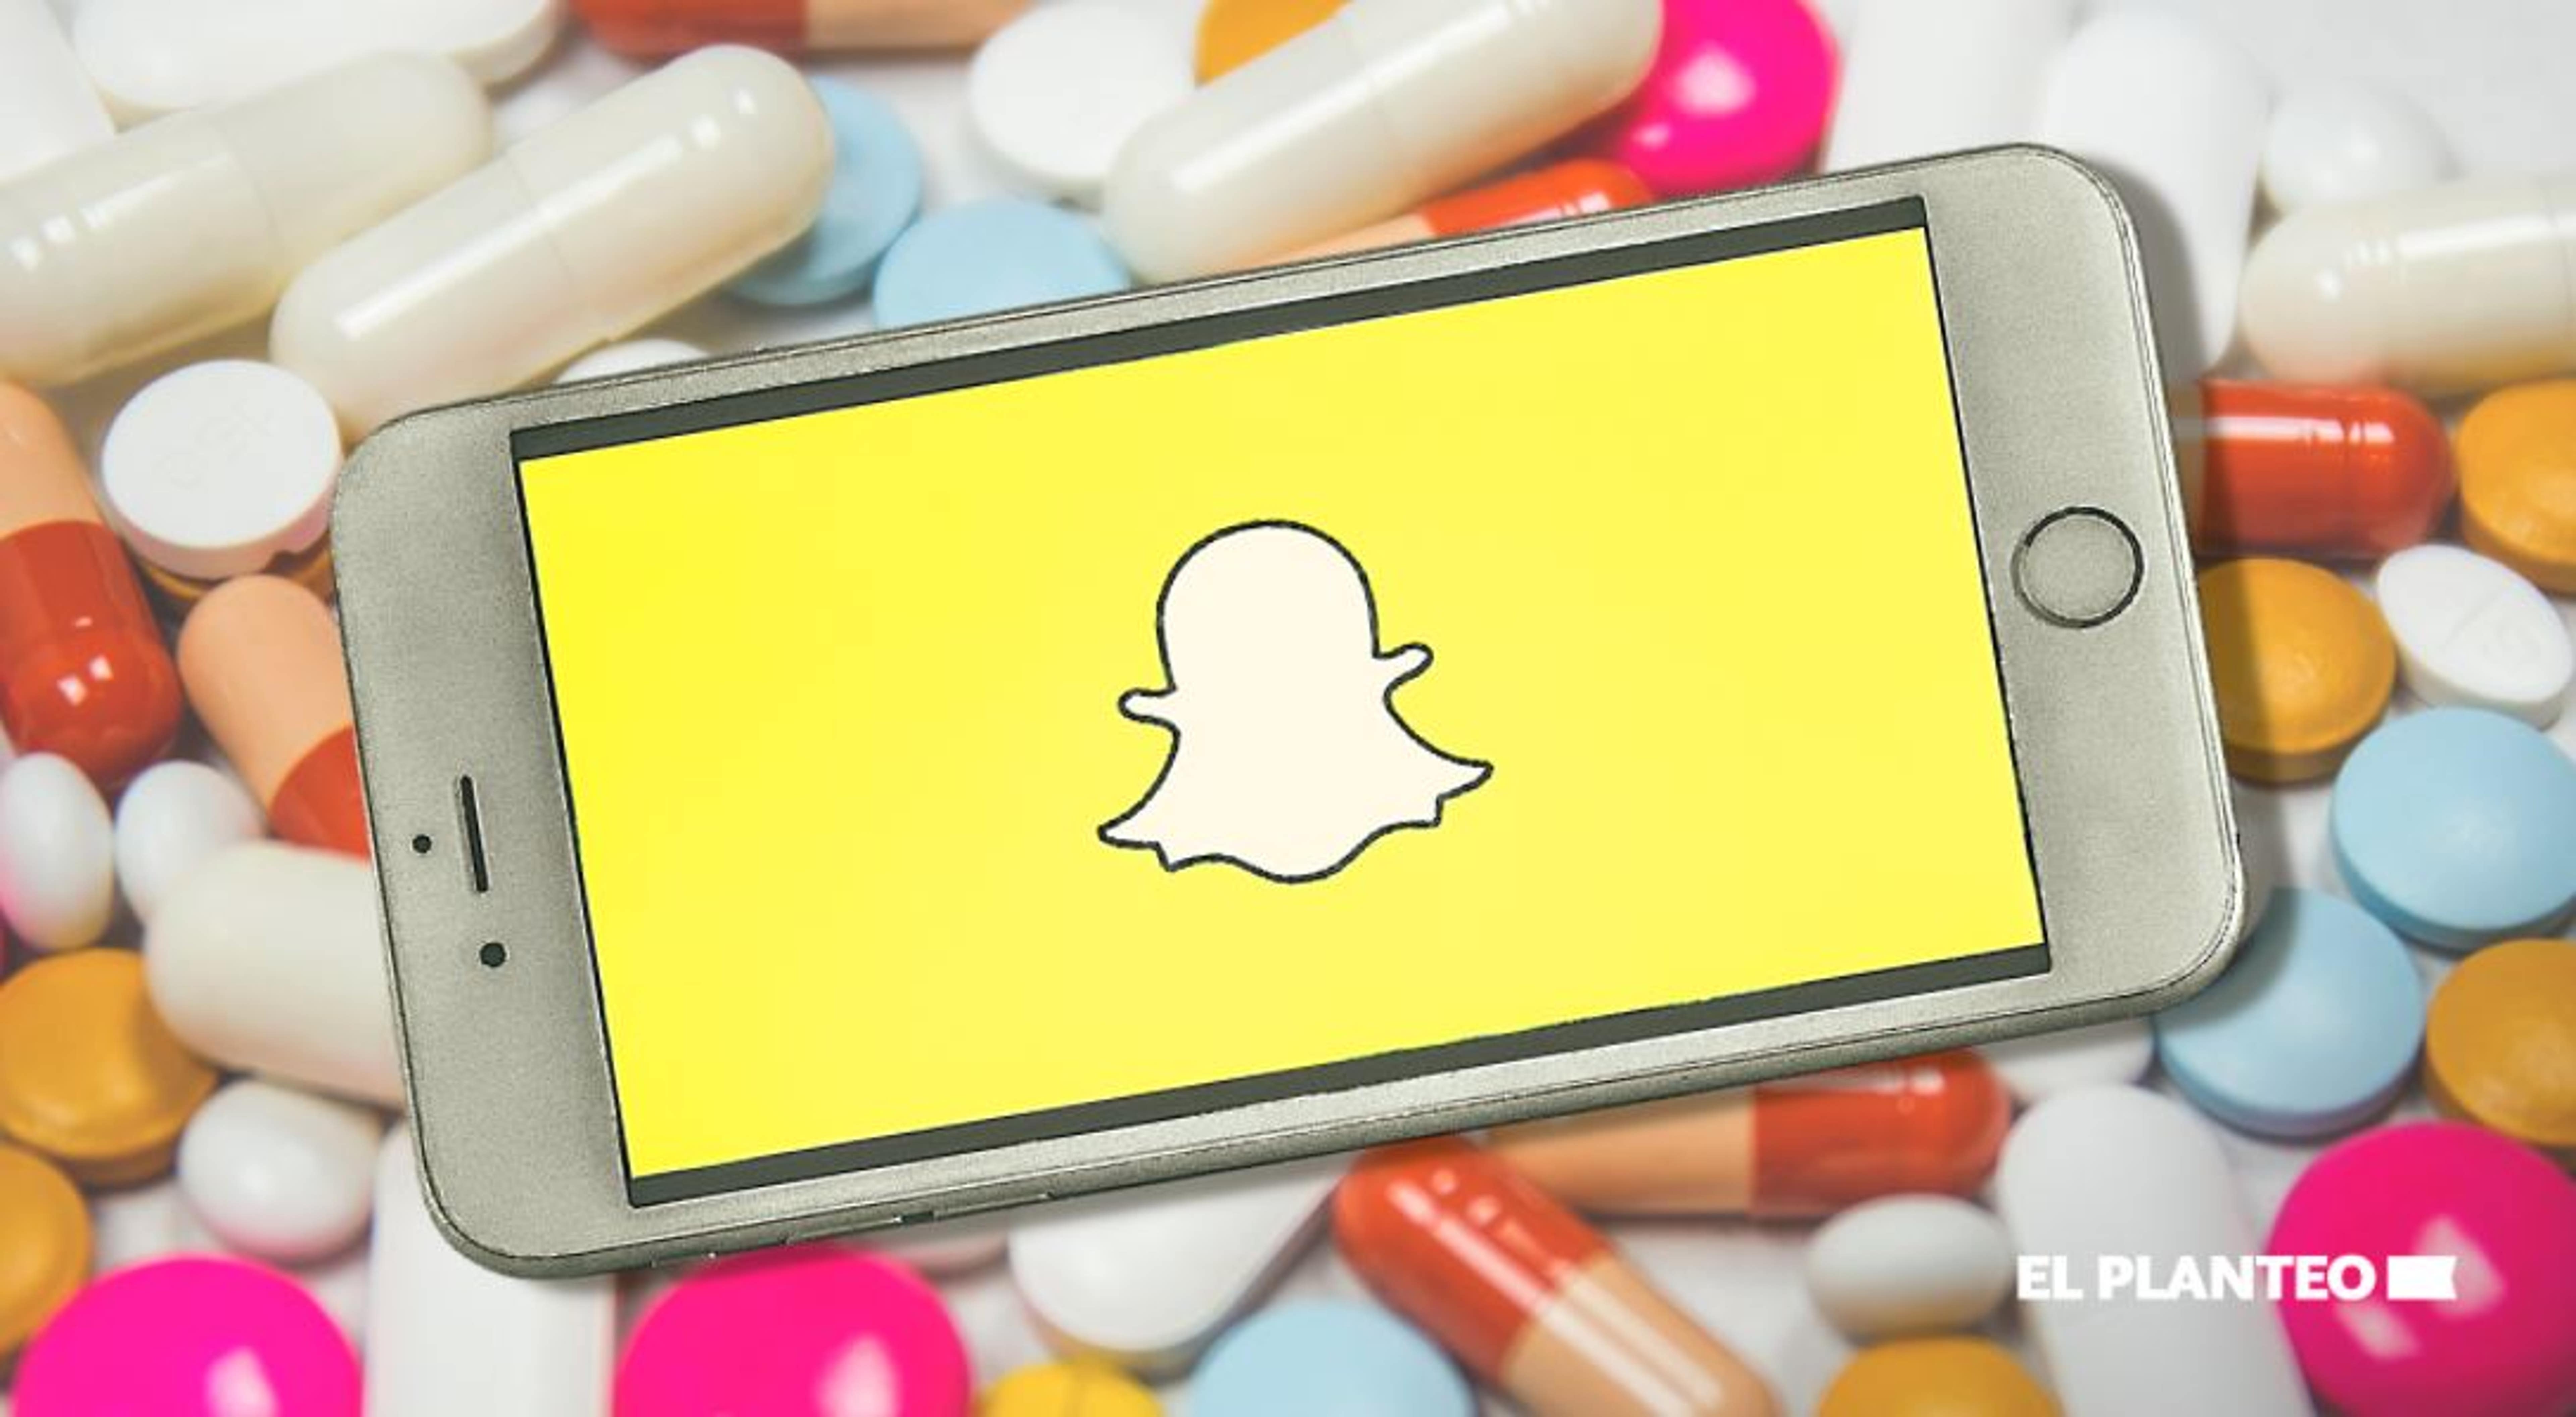 Fentanyl Deaths: Snapchat To Crack Down On Trafficking On The Platform, Seeking To Protect Minors